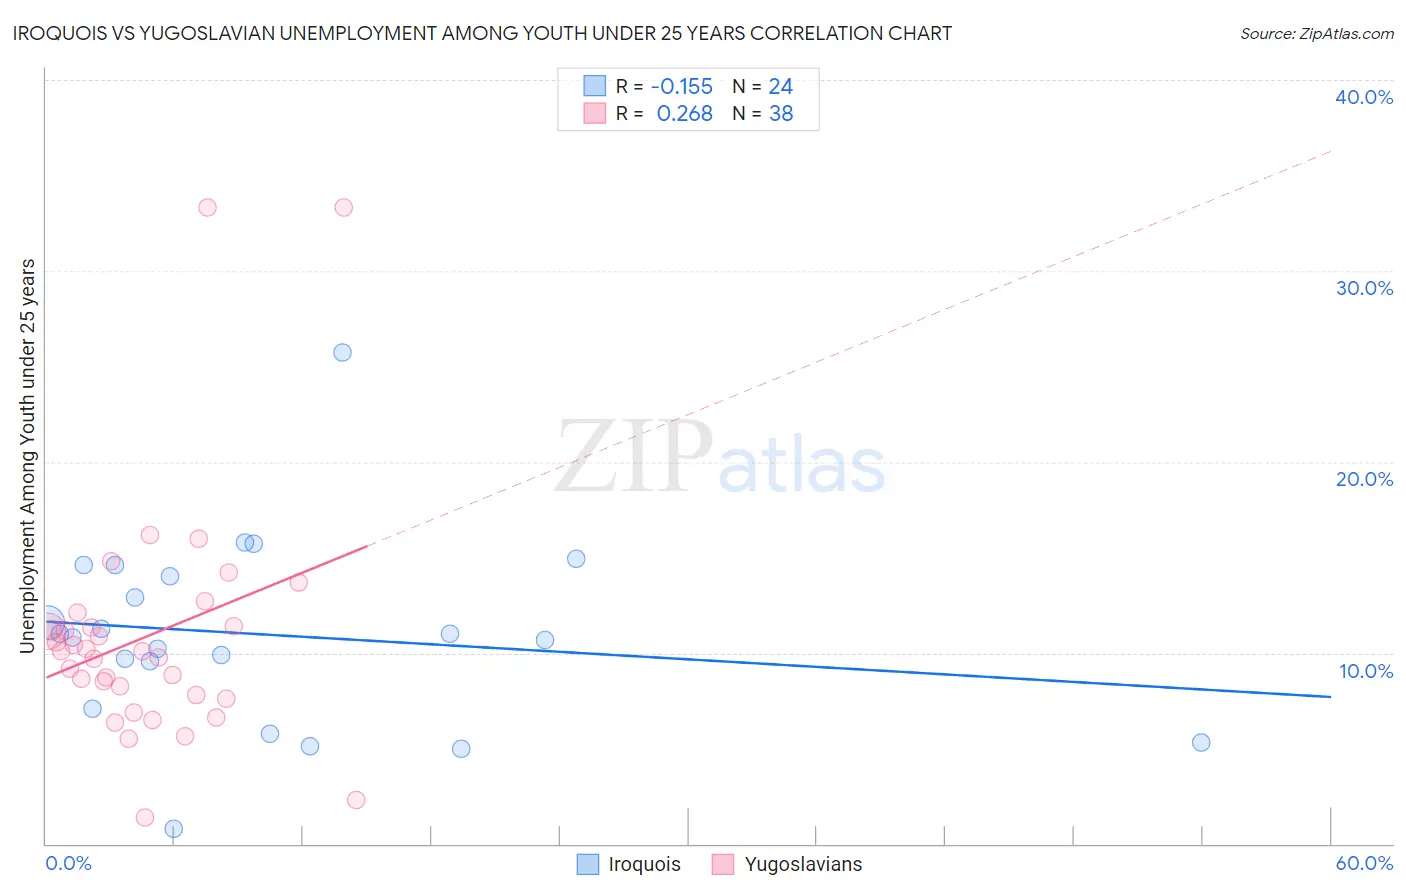 Iroquois vs Yugoslavian Unemployment Among Youth under 25 years